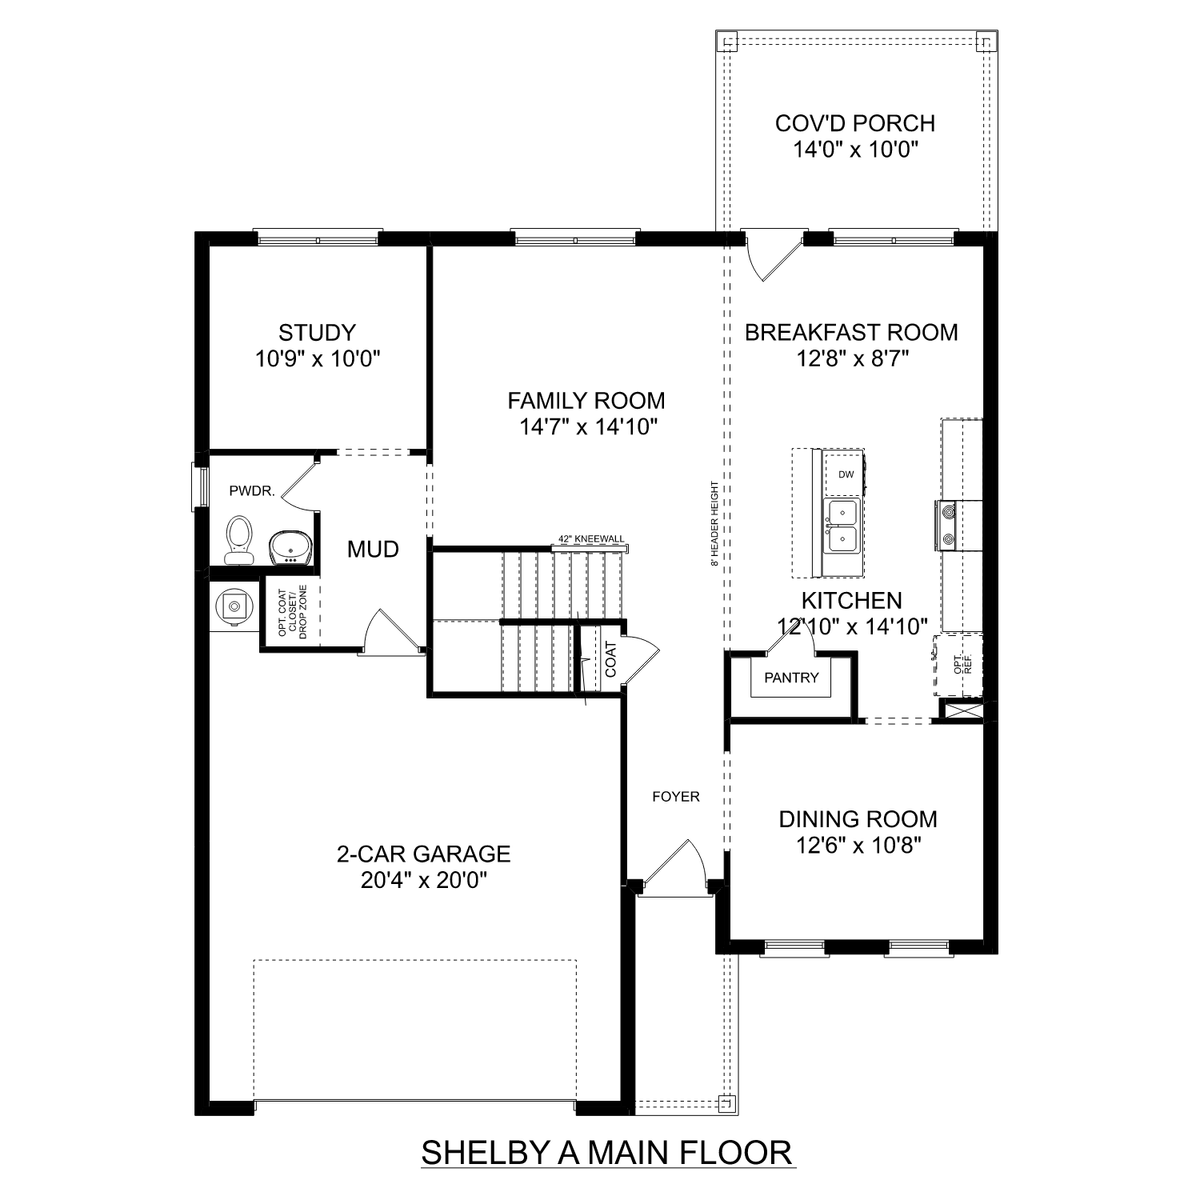 1 - The Shelby A buildable floor plan layout in Davidson Homes' Watts Glen community.